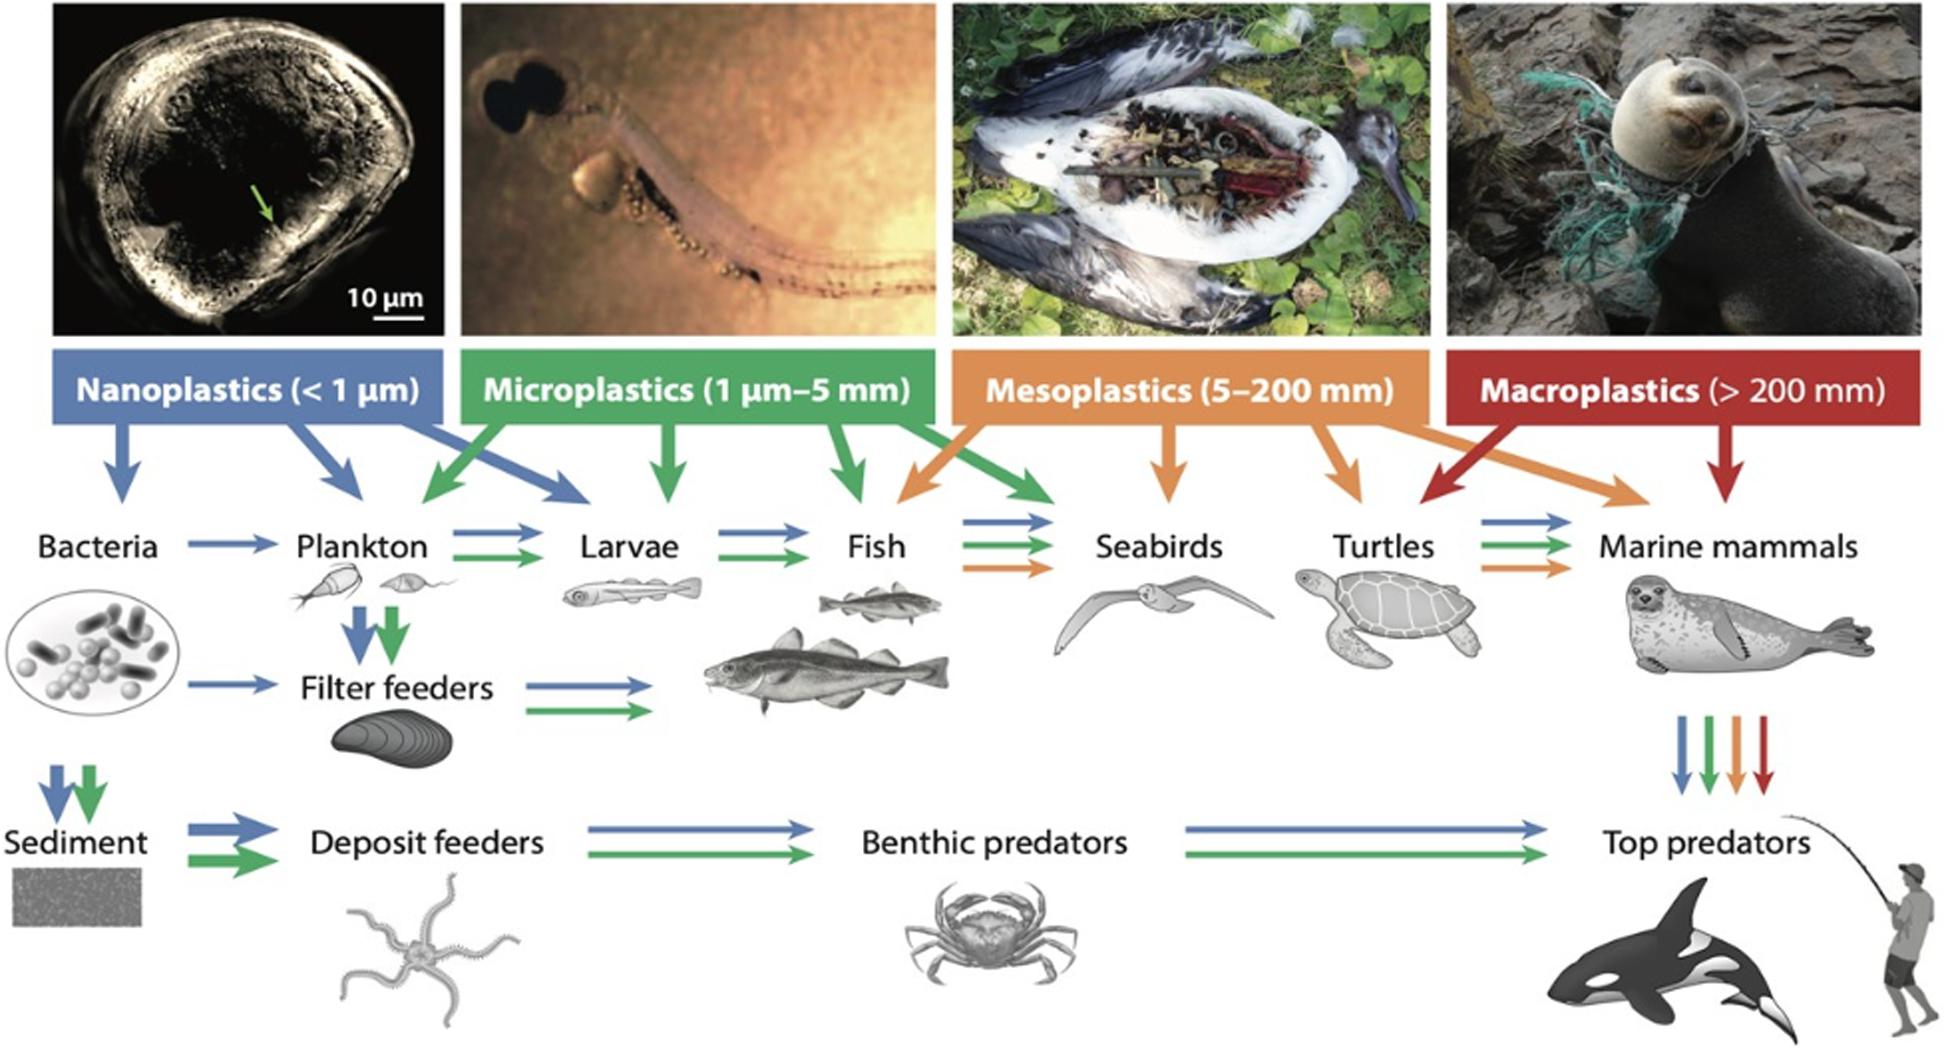 Frontiers  Marine Environmental Plastic Pollution: Mitigation by  Microorganism Degradation and Recycling Valorization